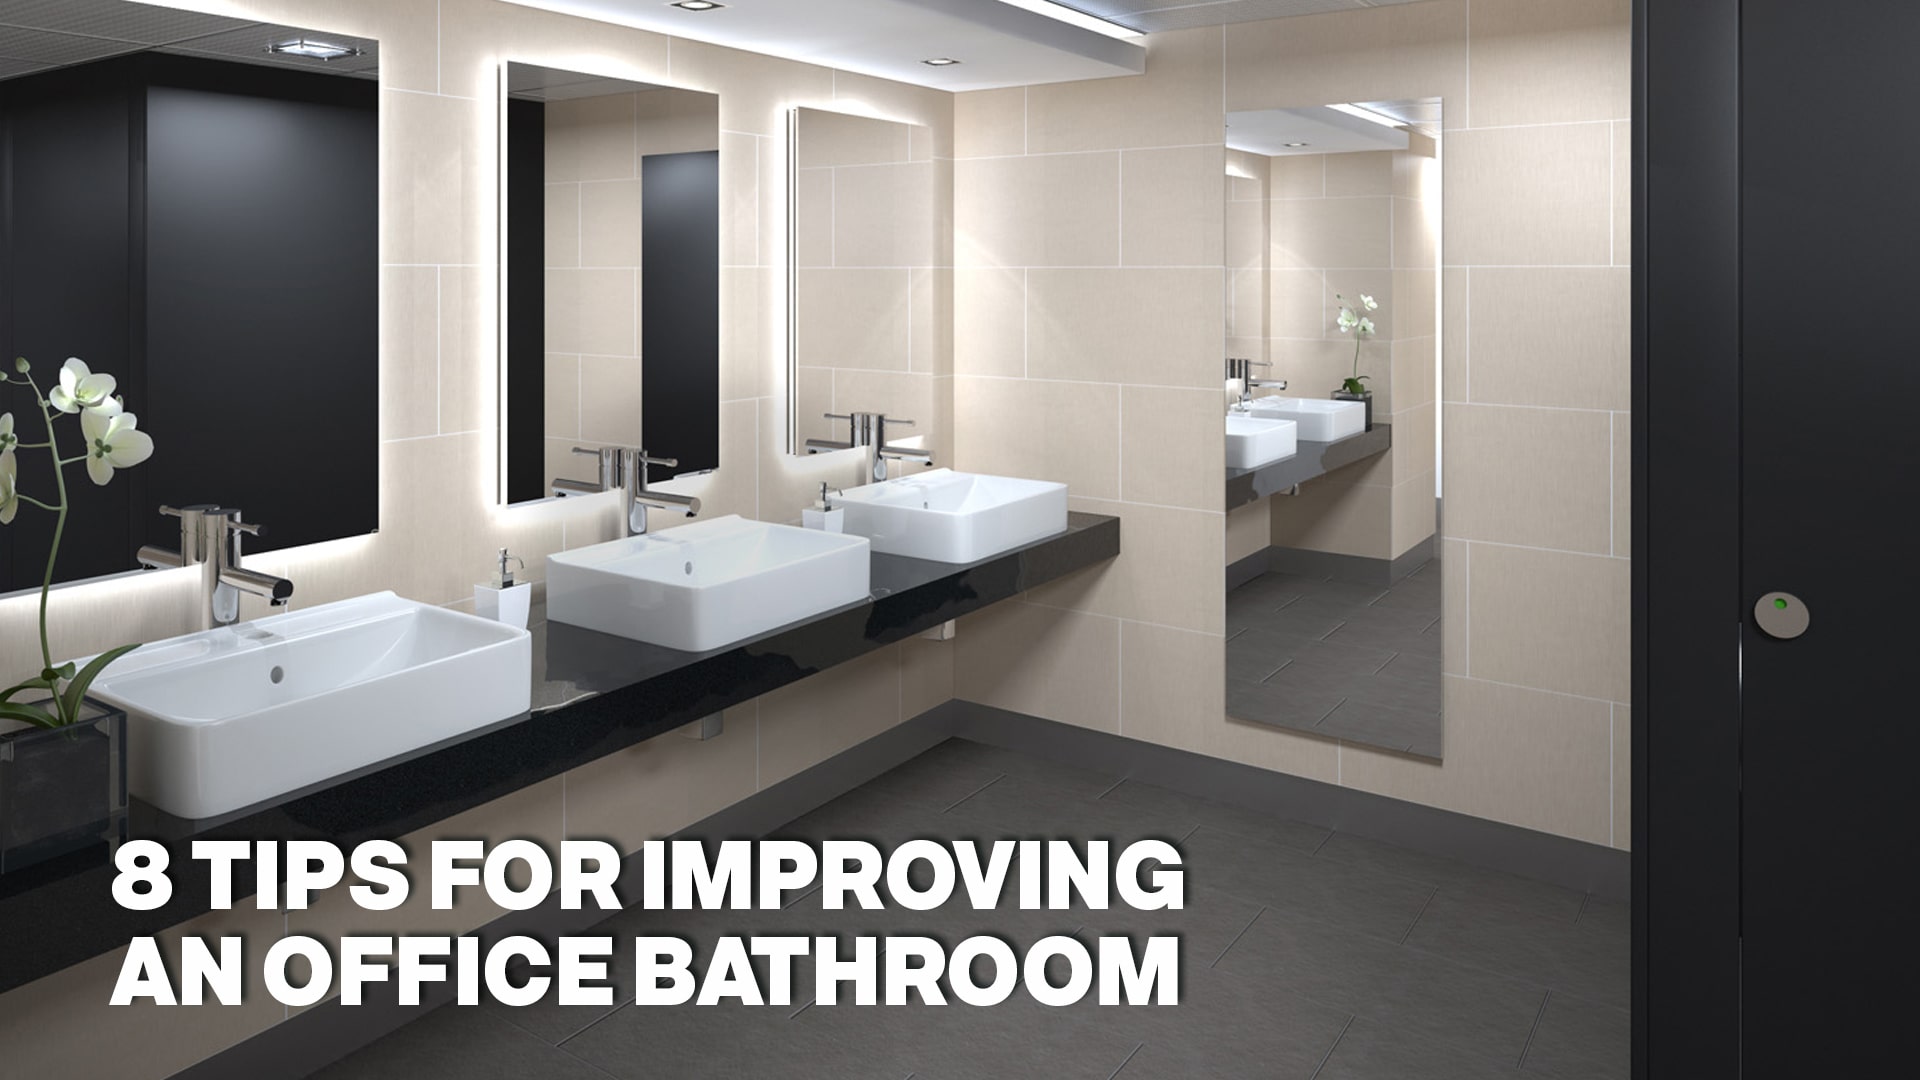 8 Tips for Improving an Office Bathroom